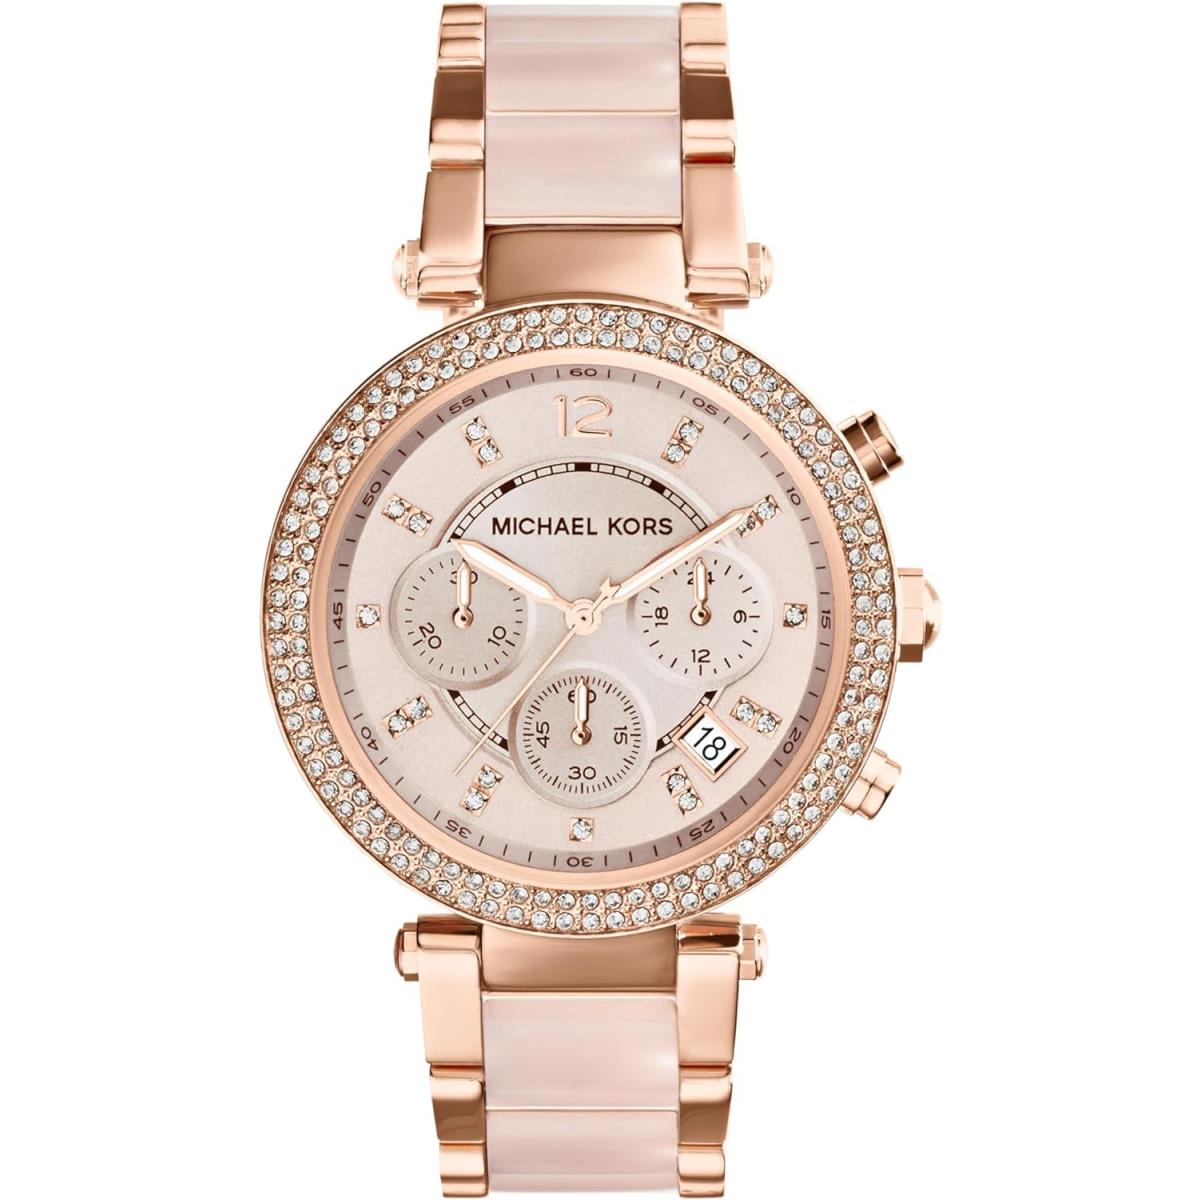 Michael Kors Parker Stainless Steel Pav Crystal Steel Leather or Silicone Band Blush/Rose Gold